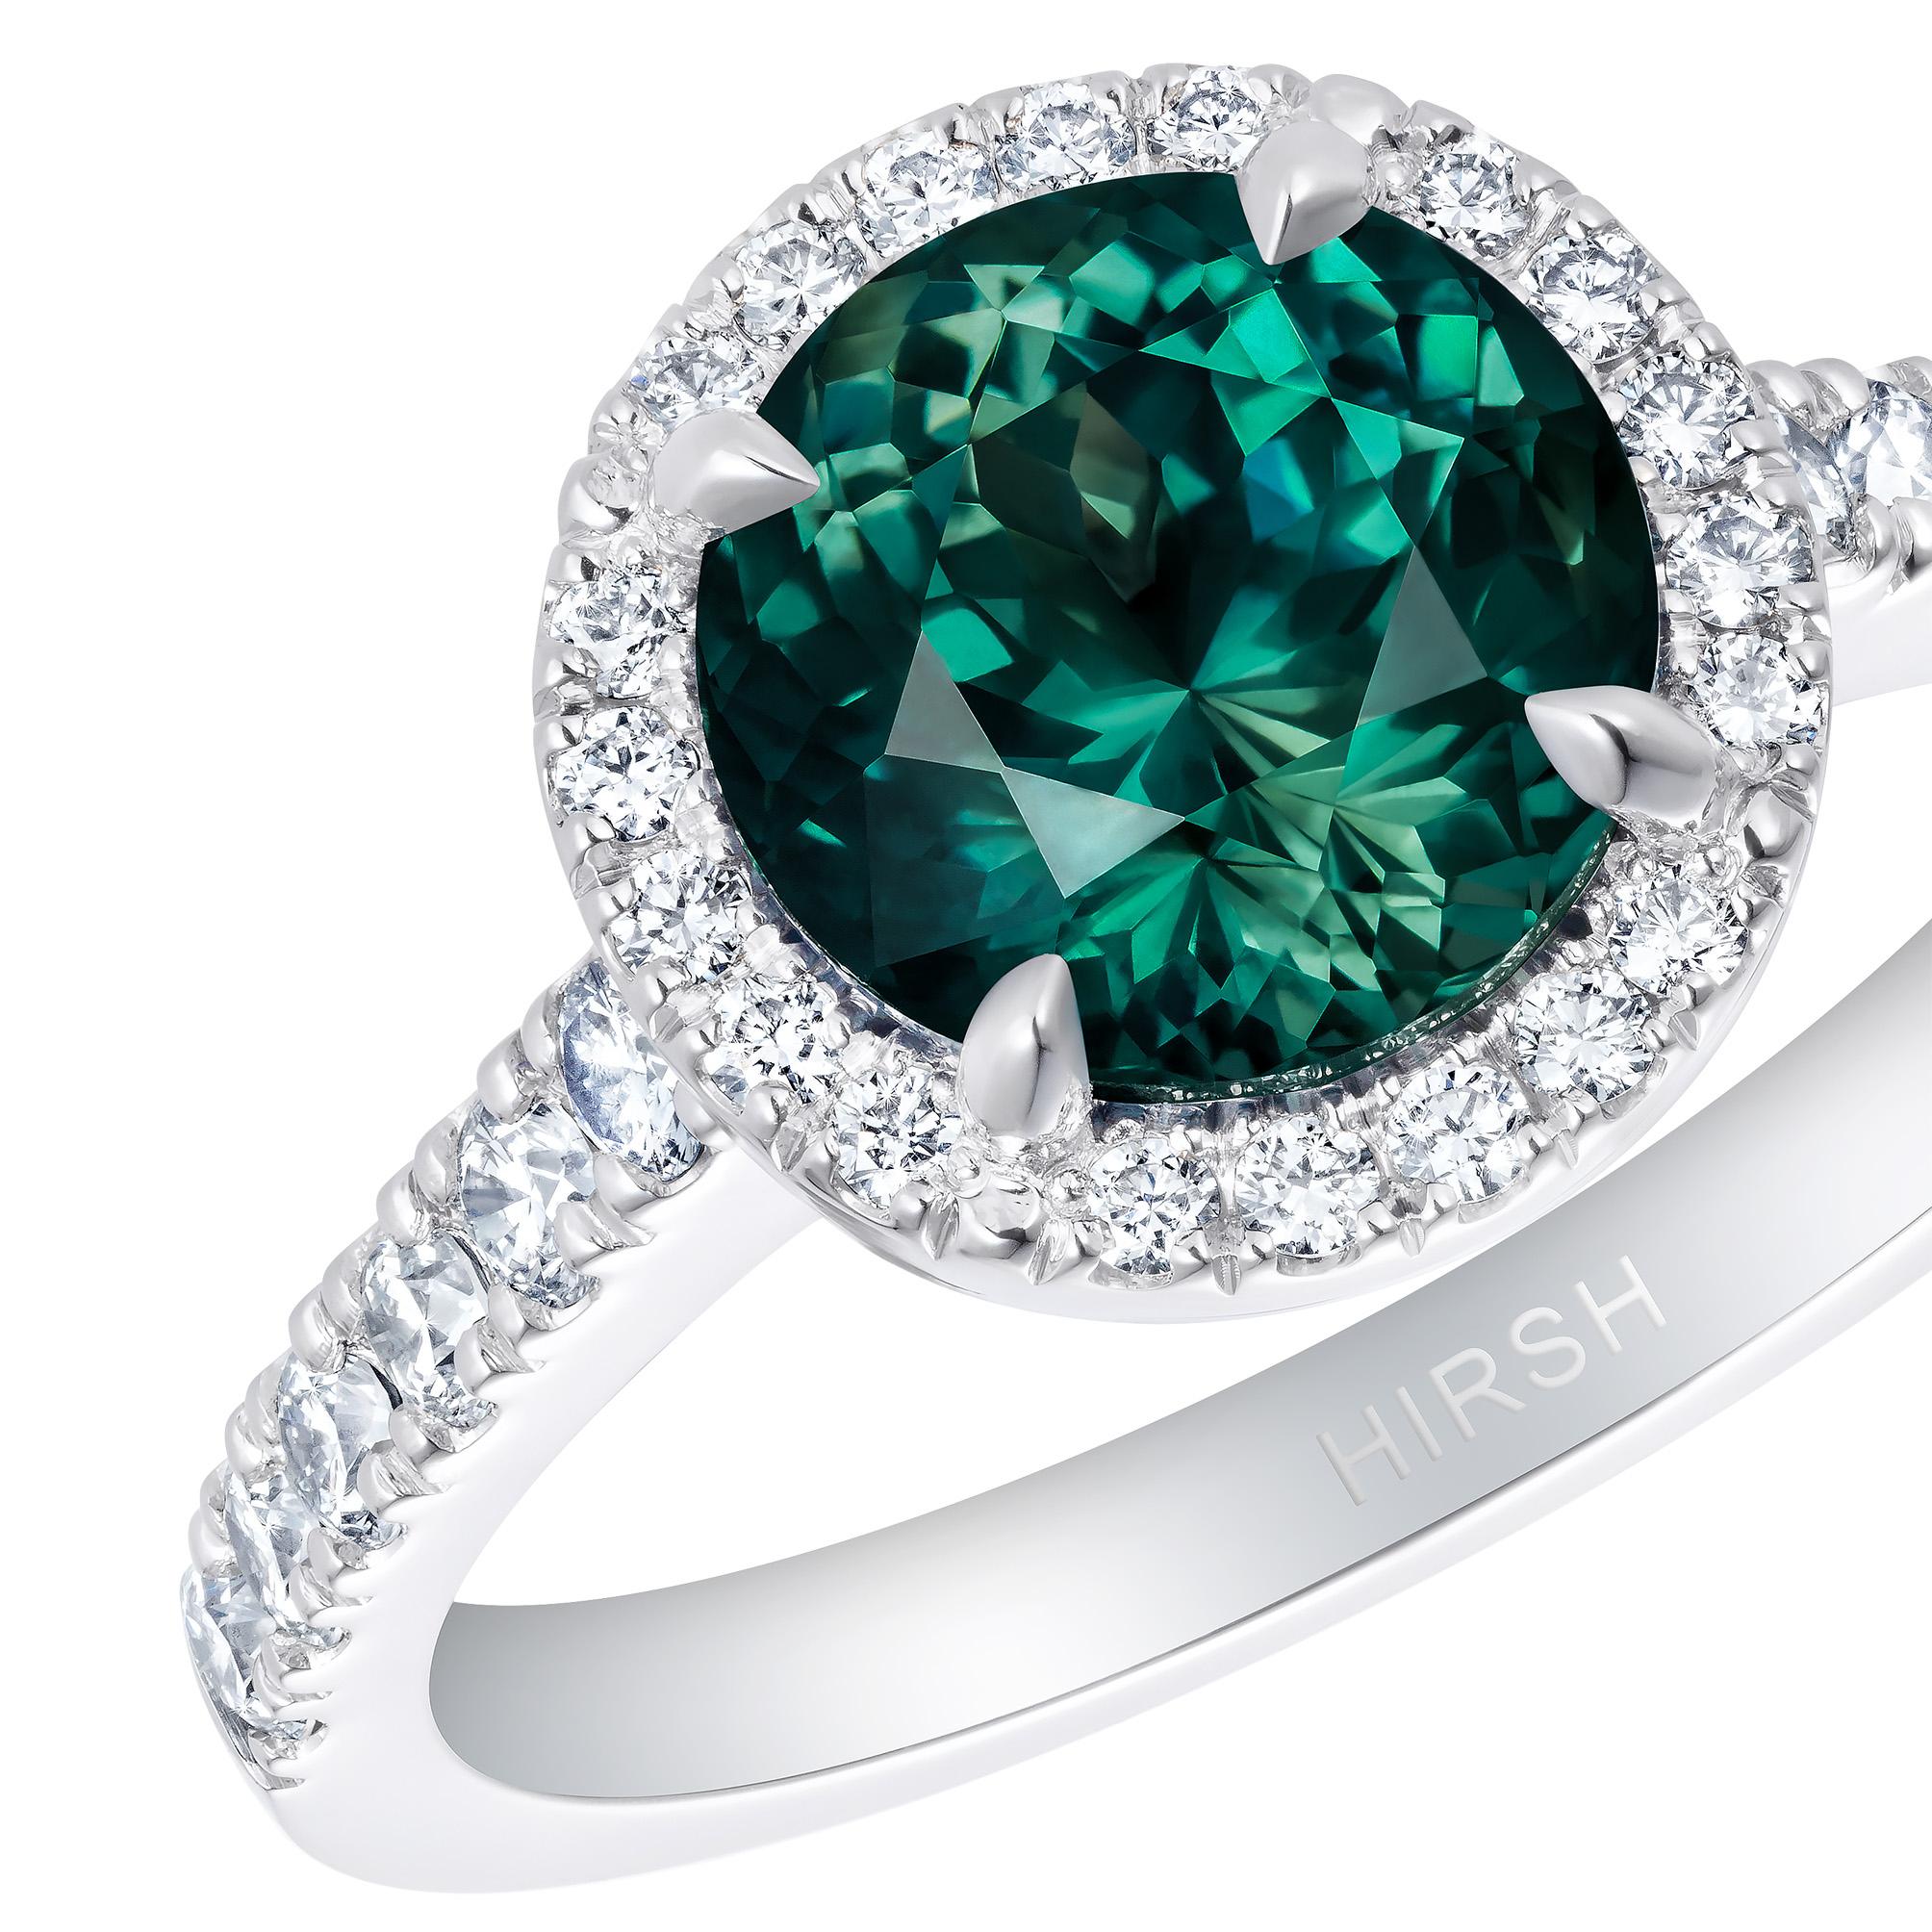 A mesmerising 2.47 carat brilliant cut teal sapphire surrounded by diamonds in the Hirsh Regal setting. This beautiful ring is handmade in platinum and features a total diamond weight of 0.39 carats.

Formed deep within the earth and found on every